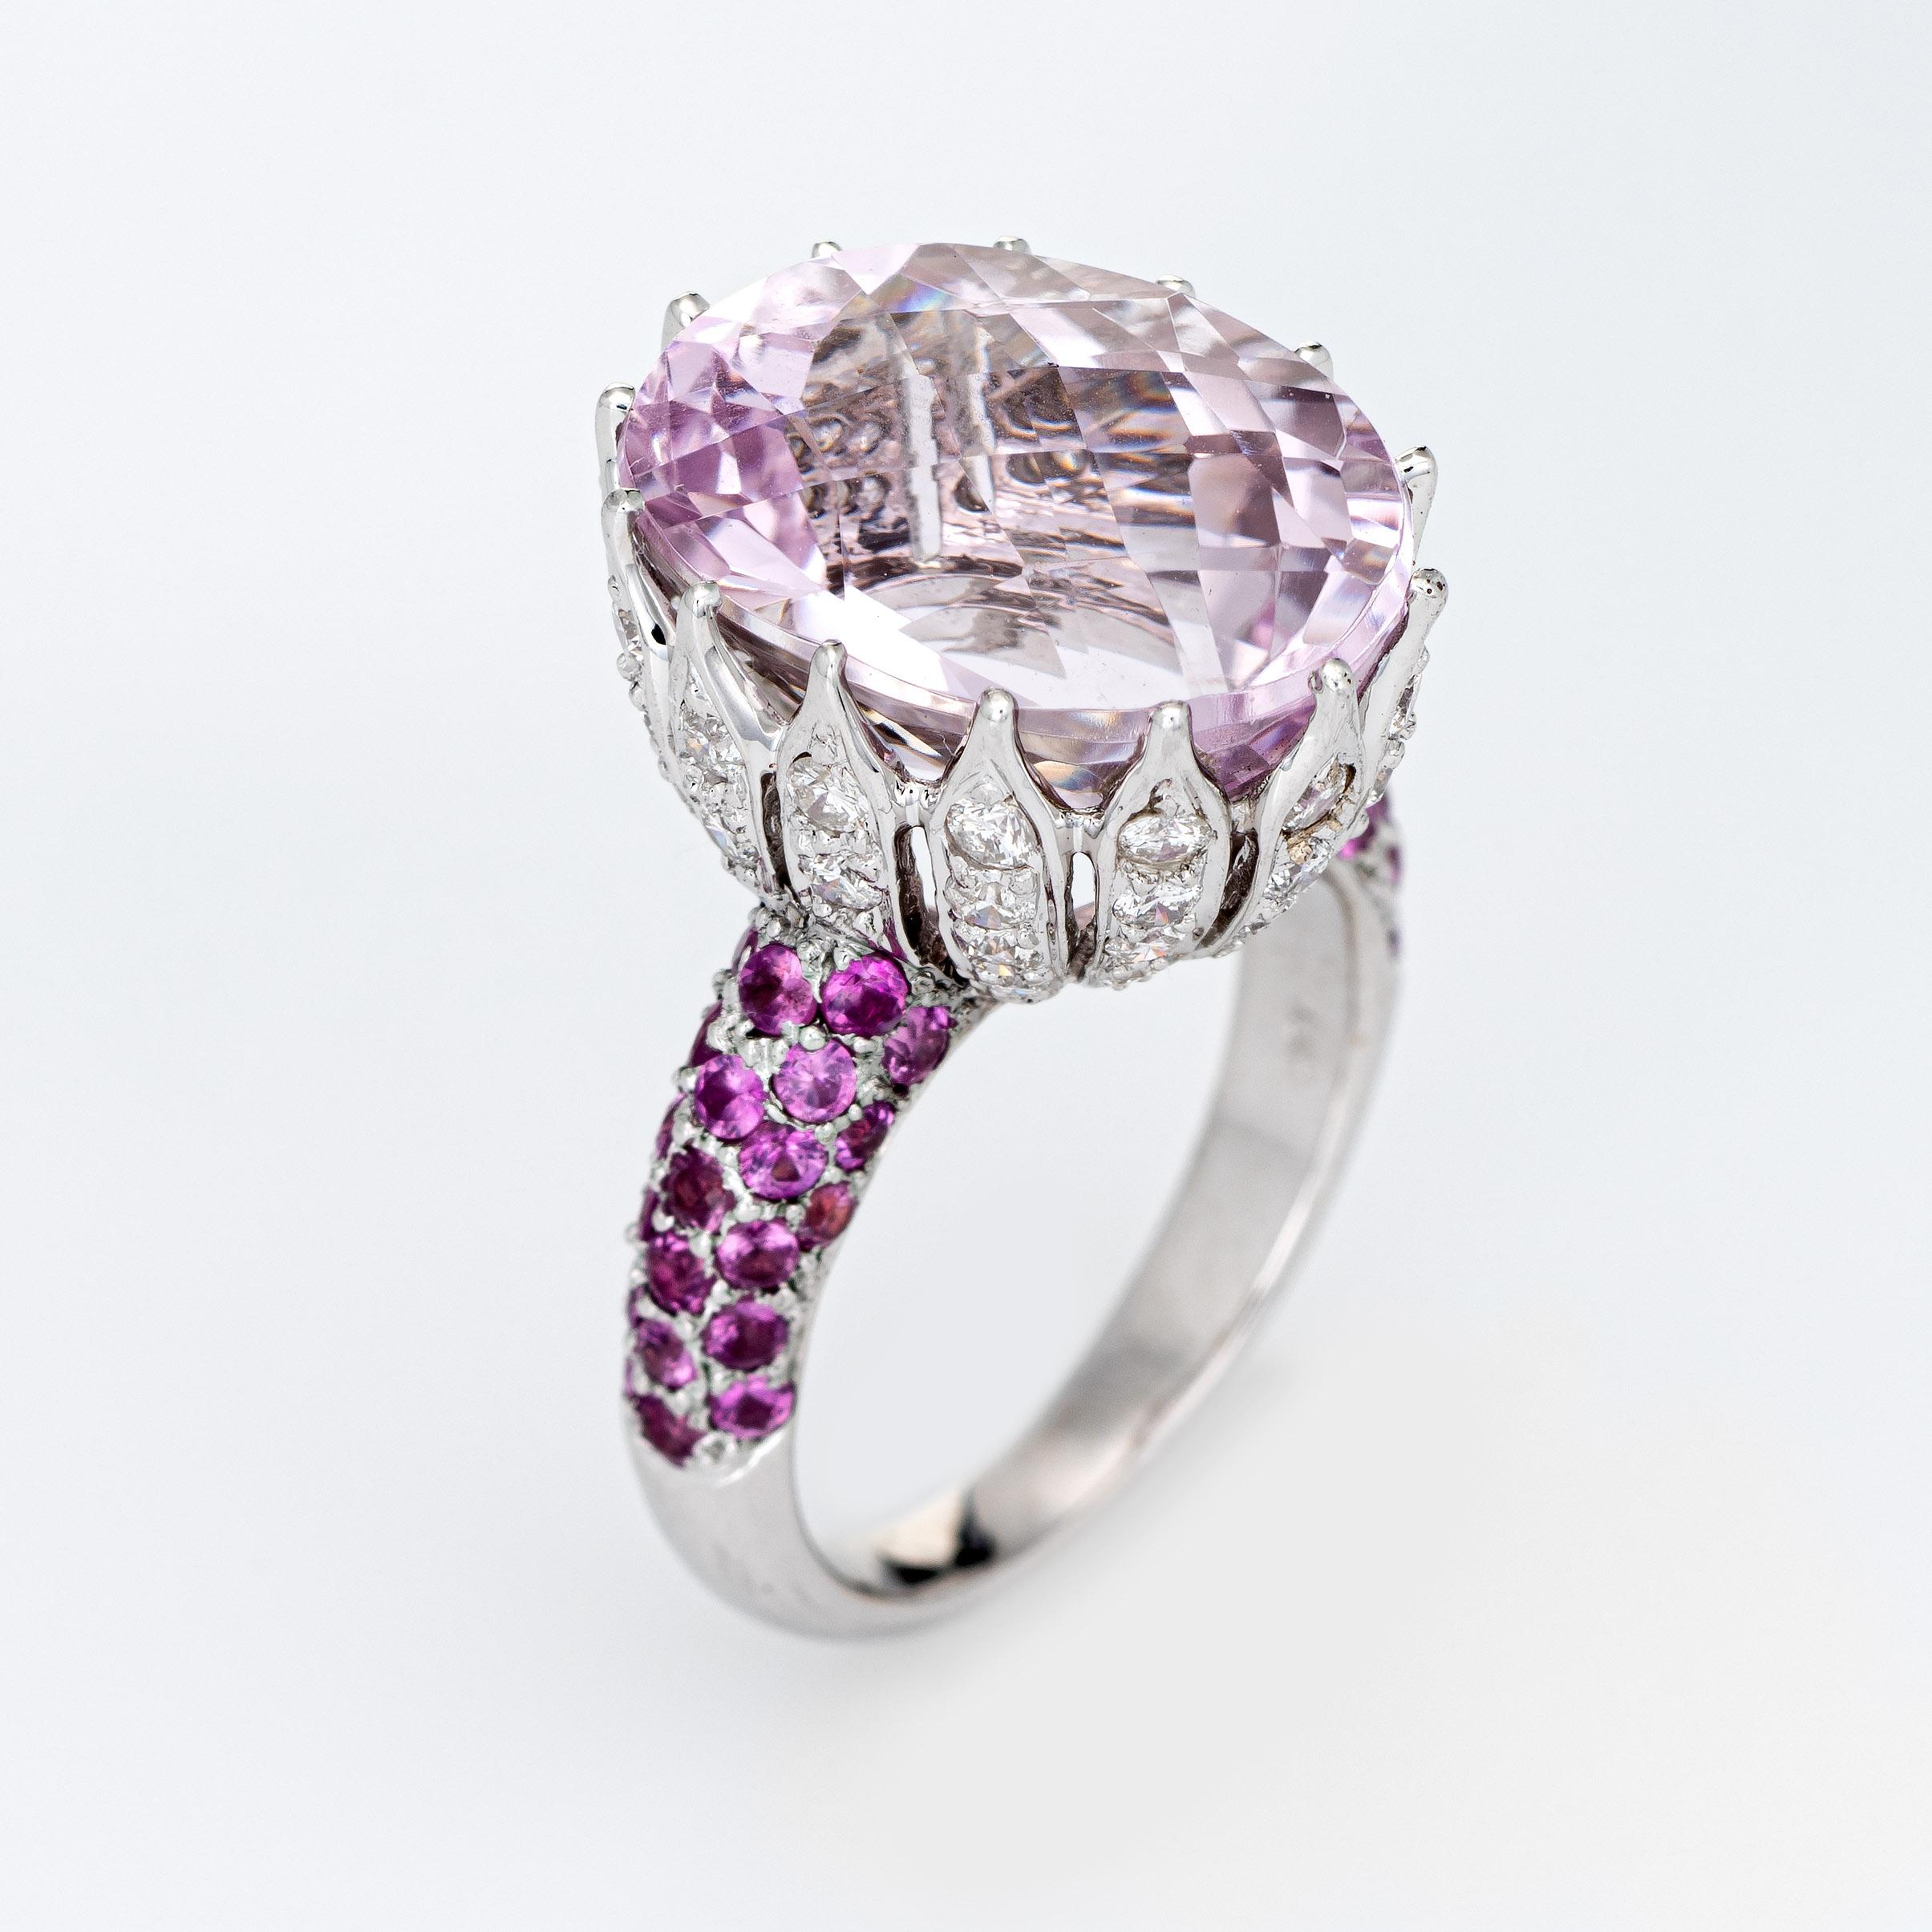 Stylish kunzite & pink sapphire cocktail ring crafted in 18 karat white gold. 

Checkerboard faceted kunzite measures 15mm x 12mm (estimated at 10.50 carats). The pink sapphires total an estimated 0.96 carats. Diamonds total an estimated 0.96 carats